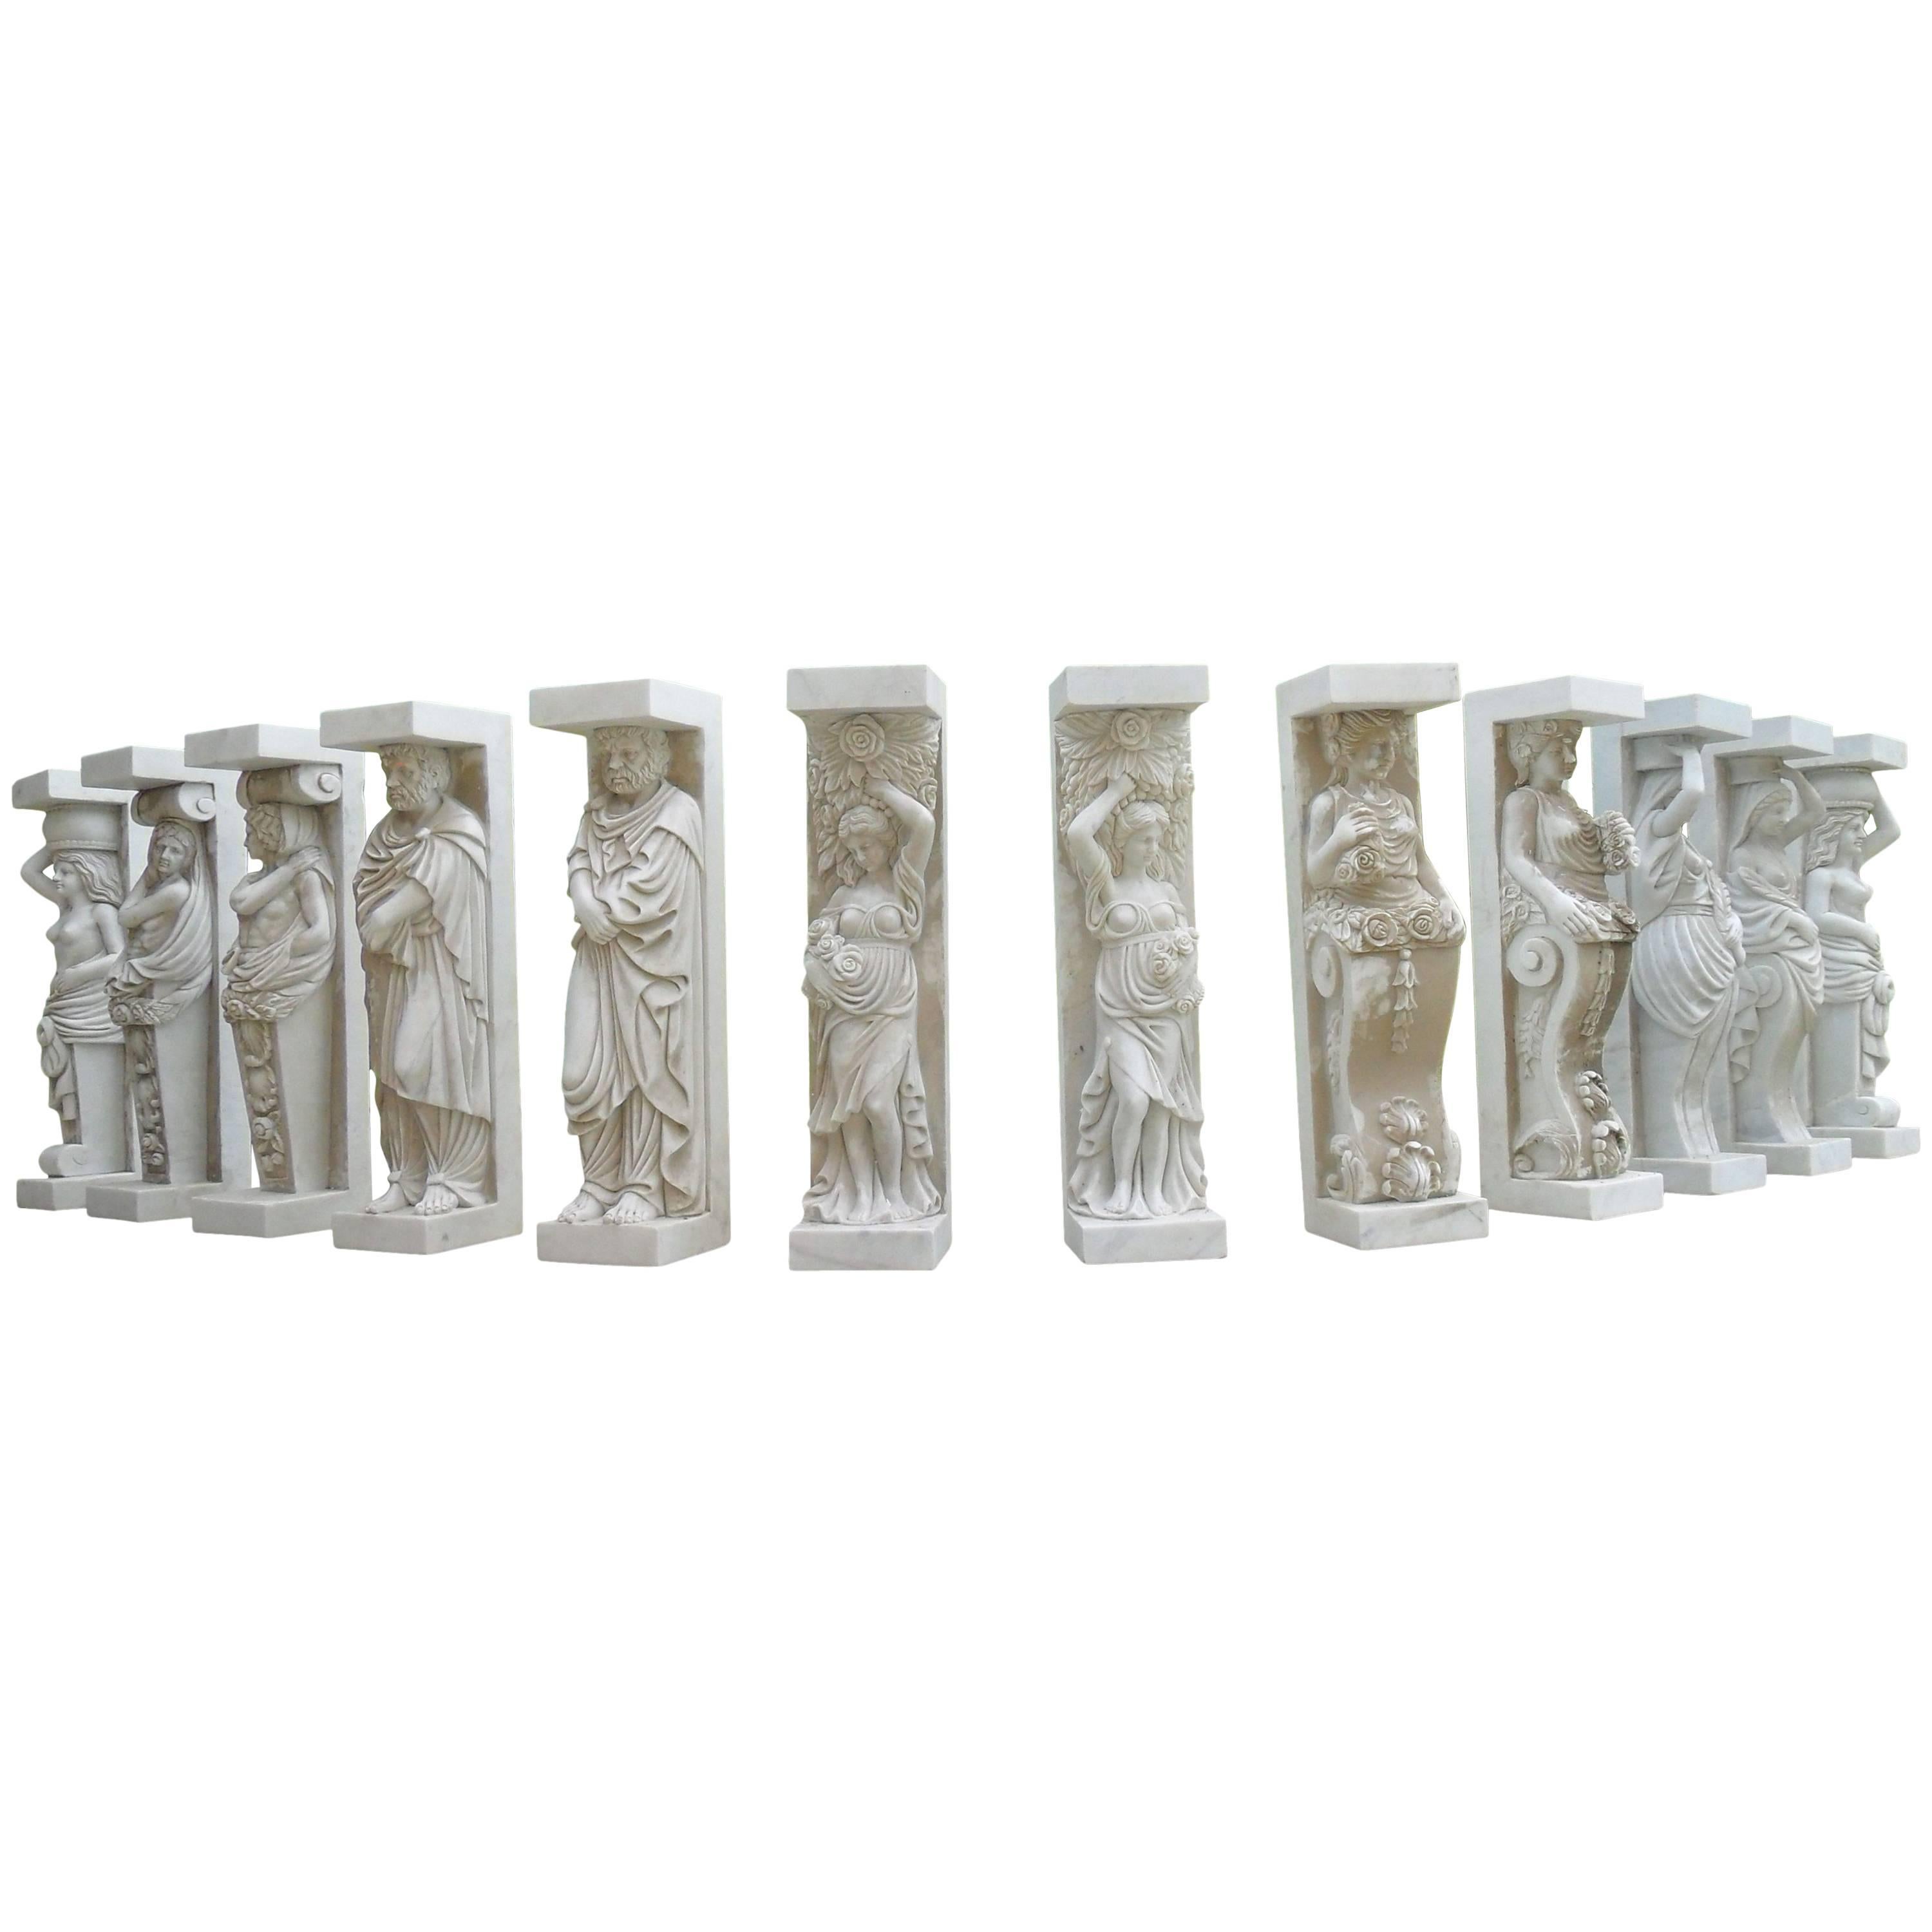 1950-1970 Set of 12 Antique White Marble Statues